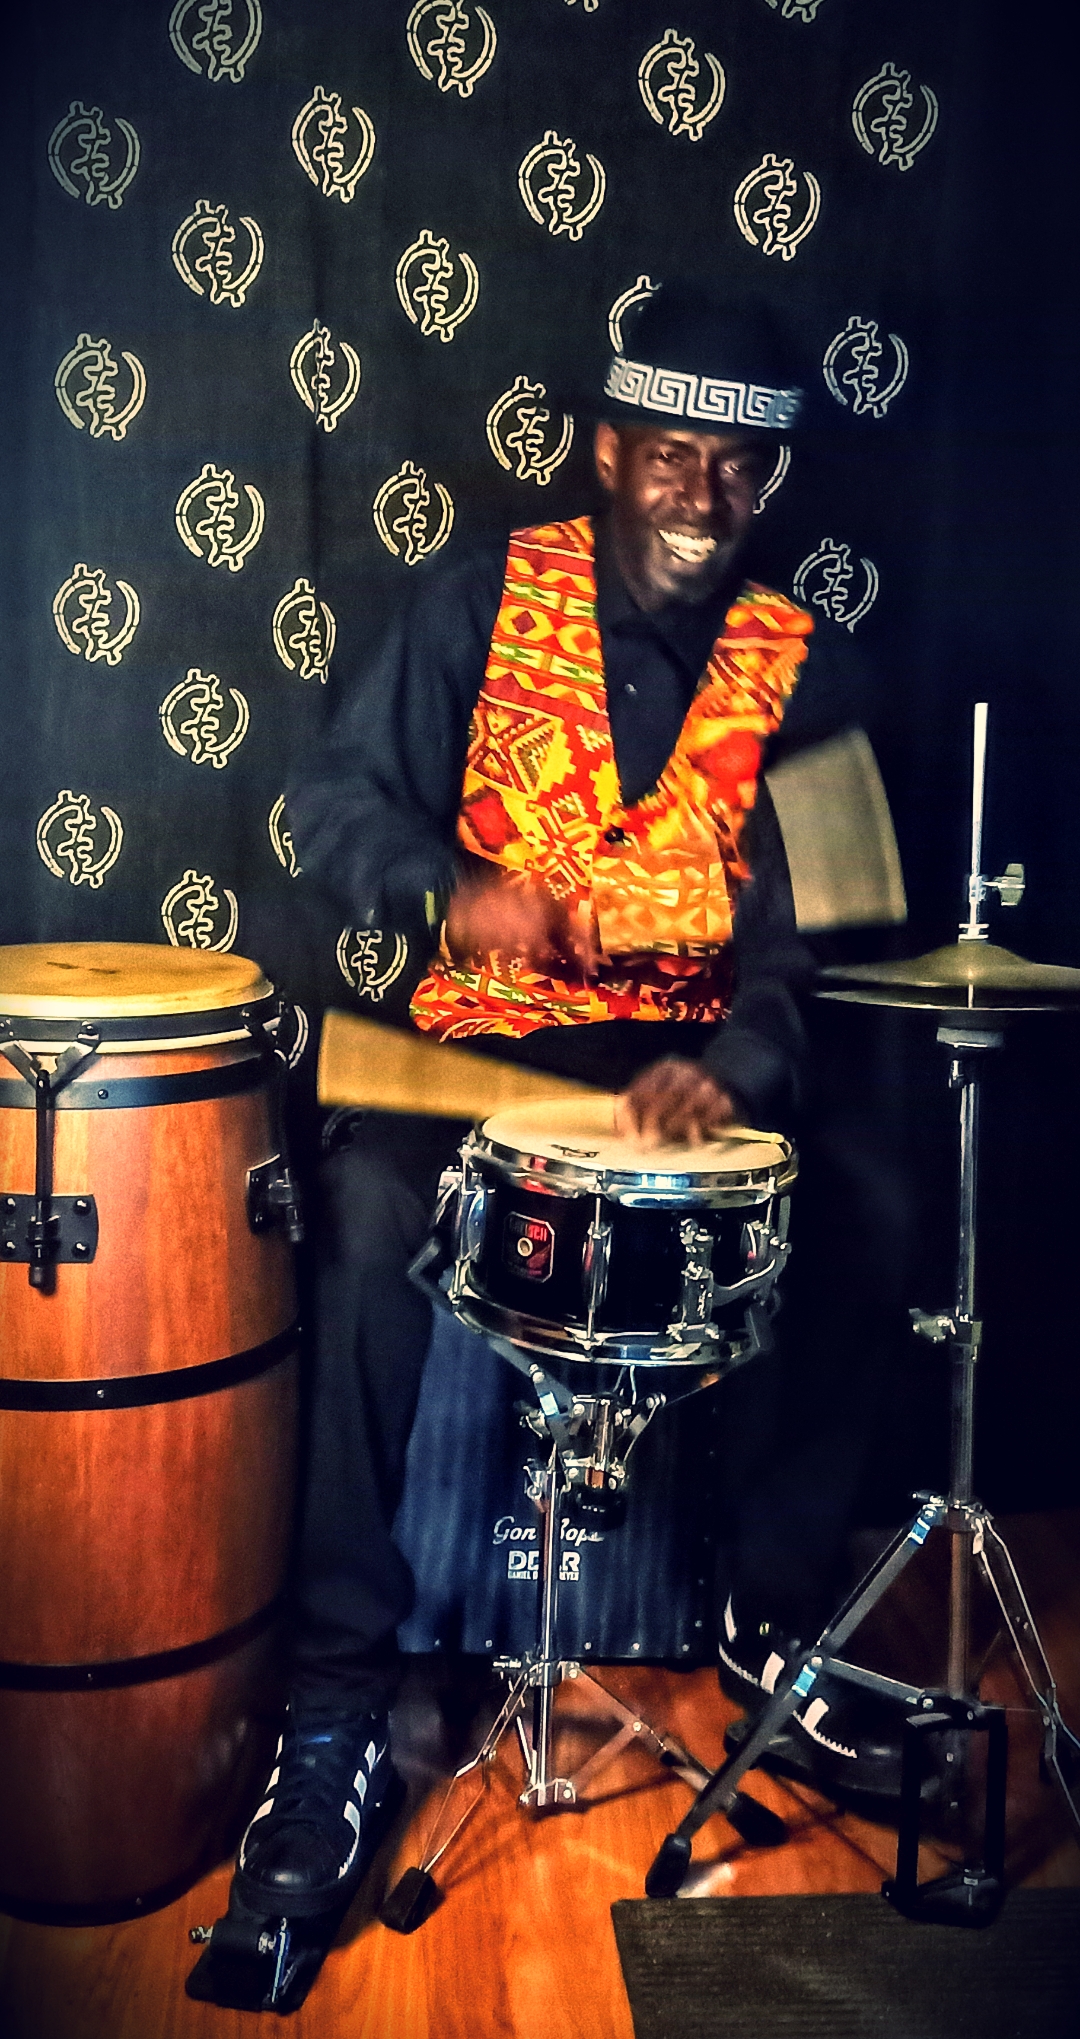 A.K. Toney on the drums